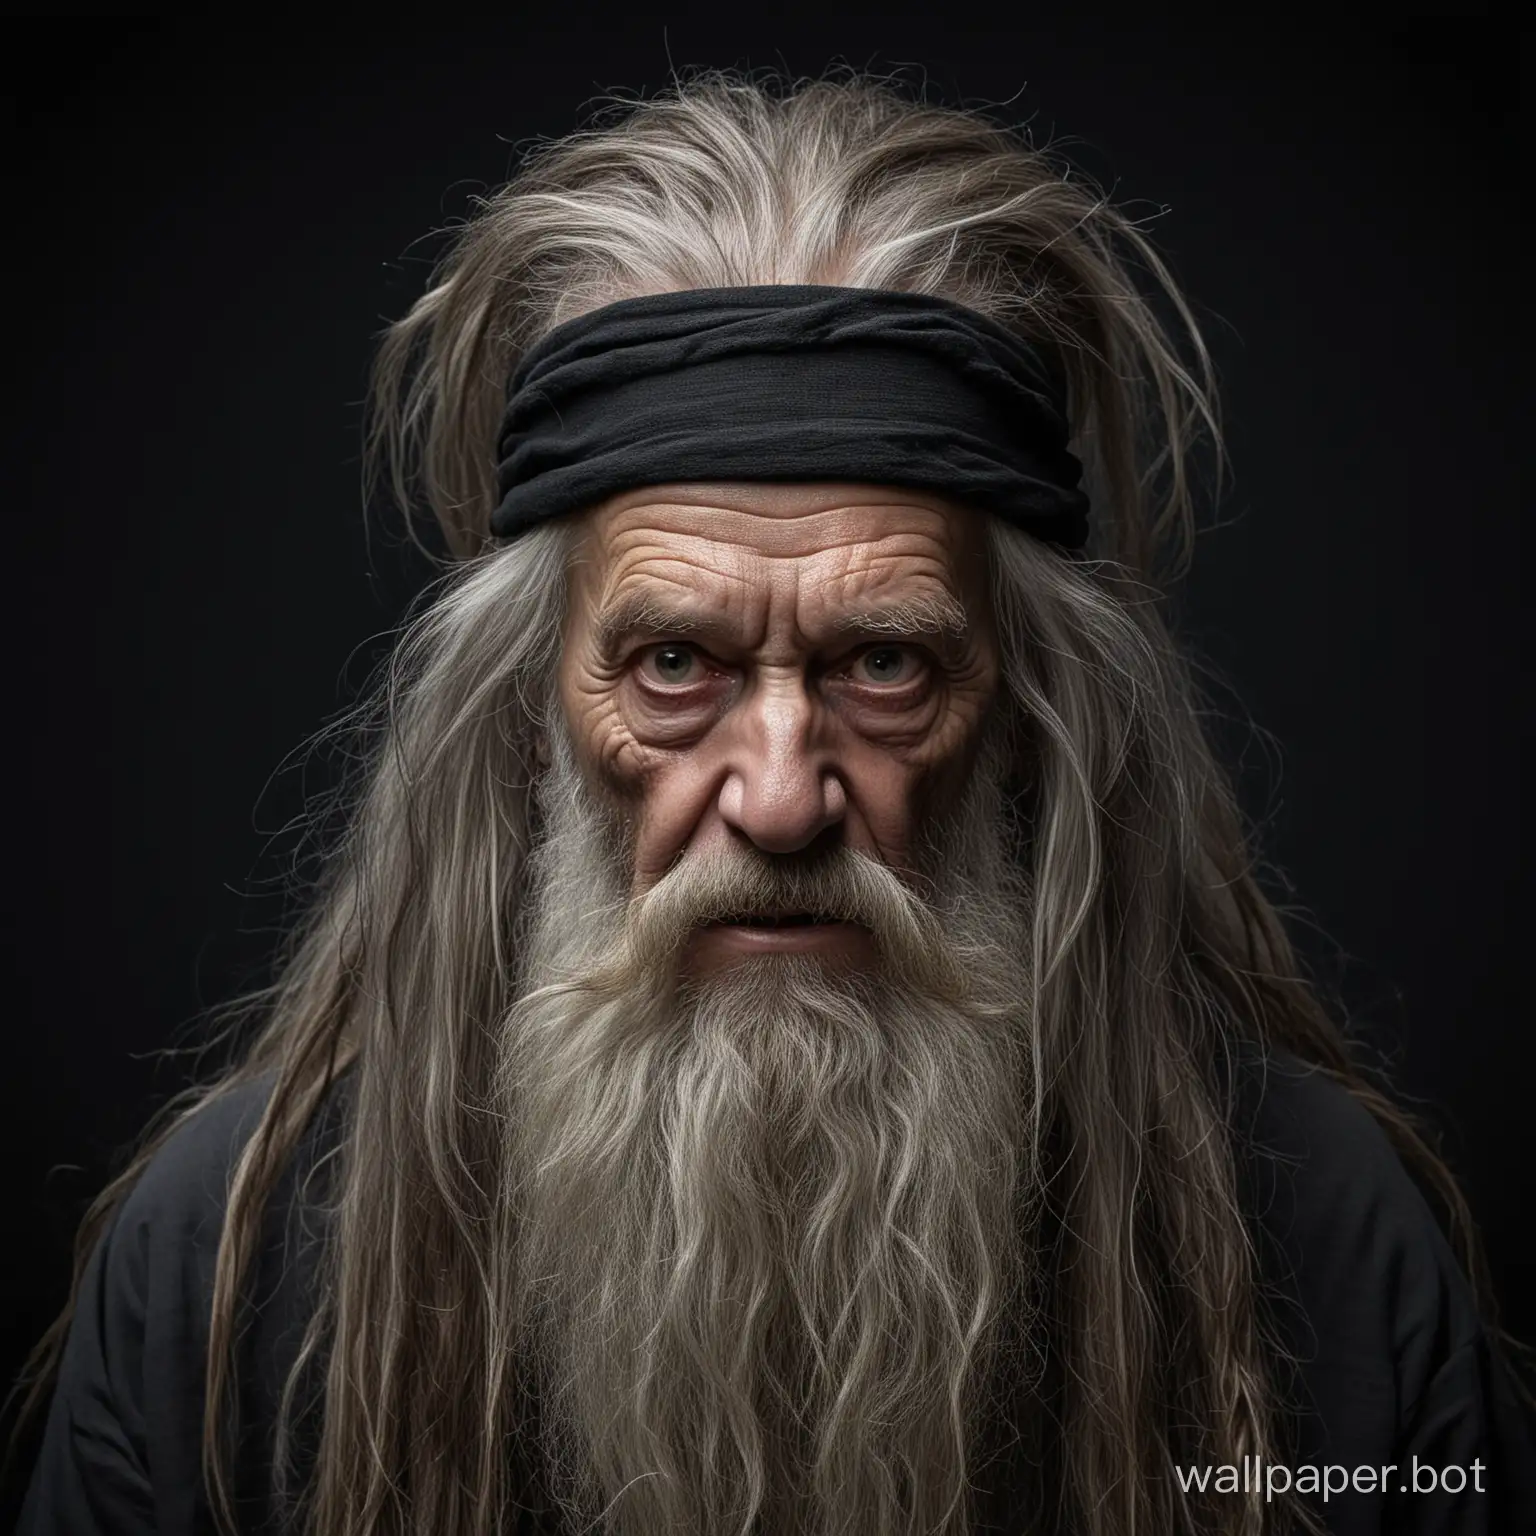 Fantasy-Old-Man-with-Long-Hair-and-Beard-on-Black-Background